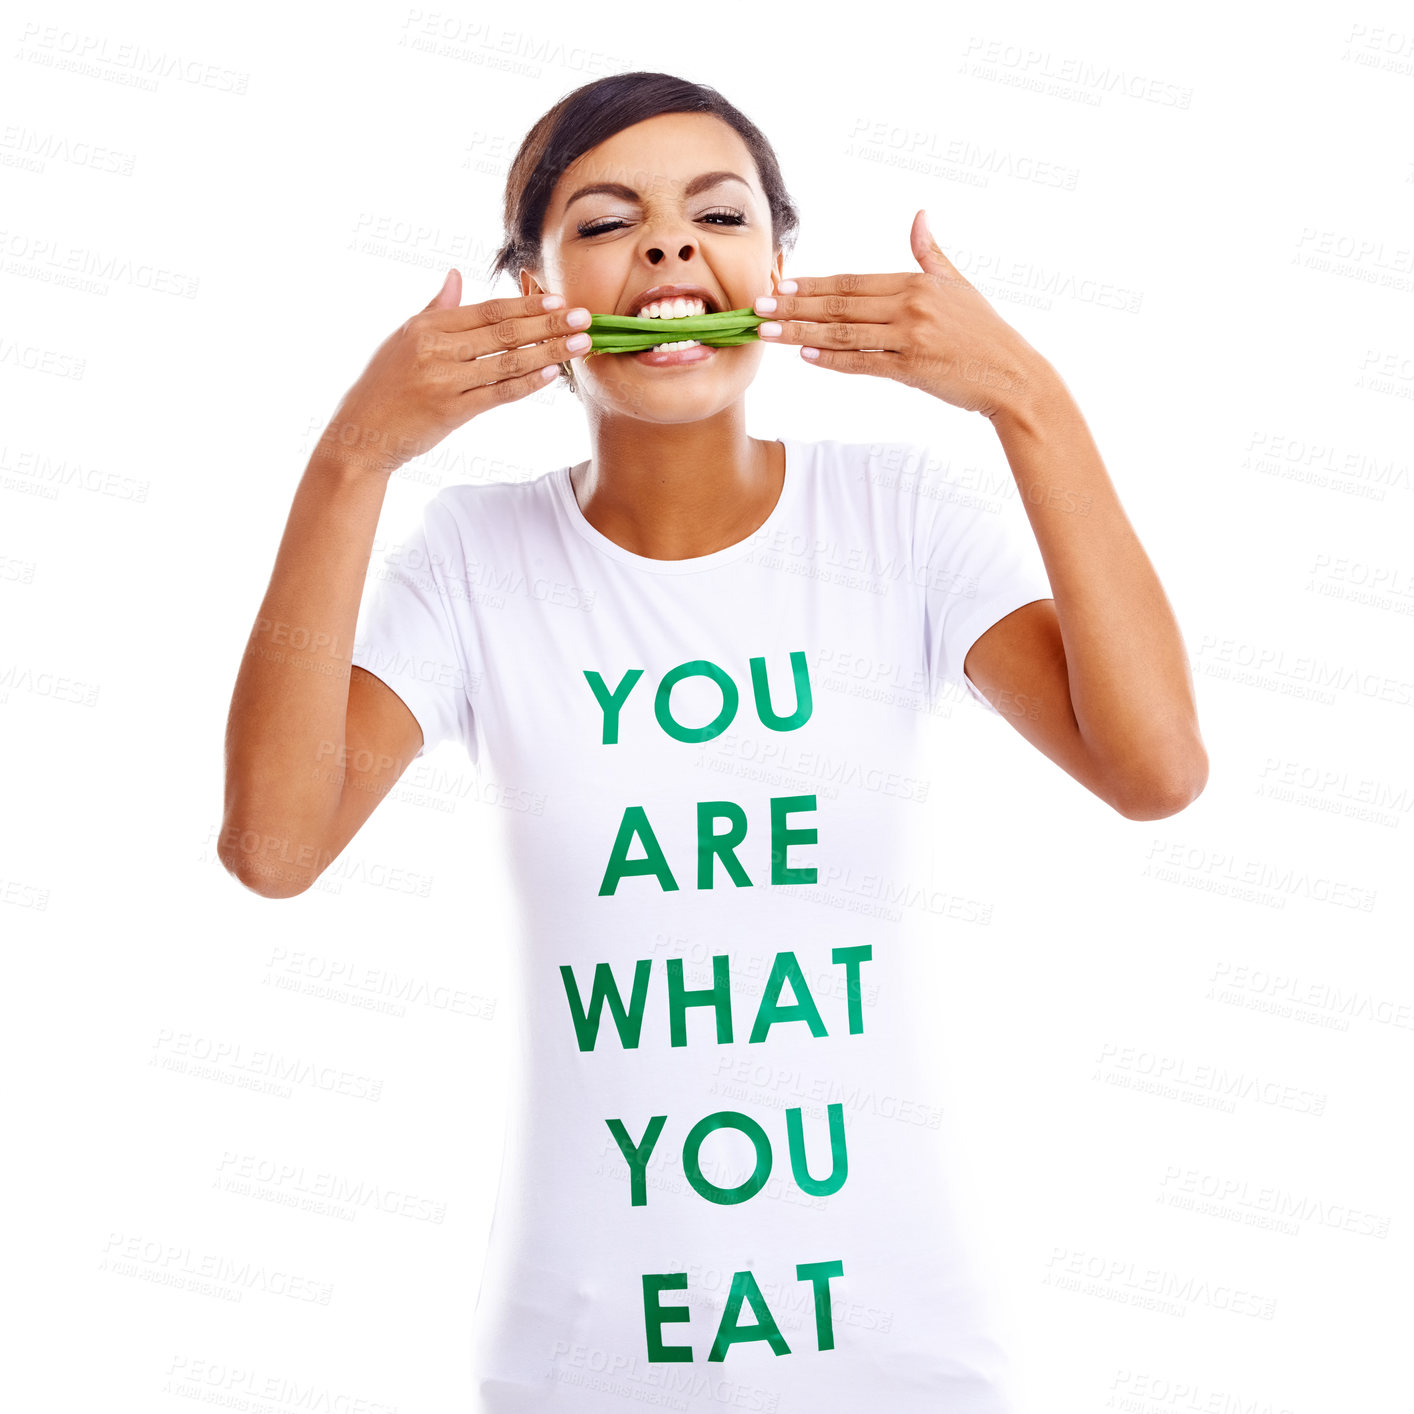 Buy stock photo Portrait of a young woman holding green beans while wearing a t-shirt saying 